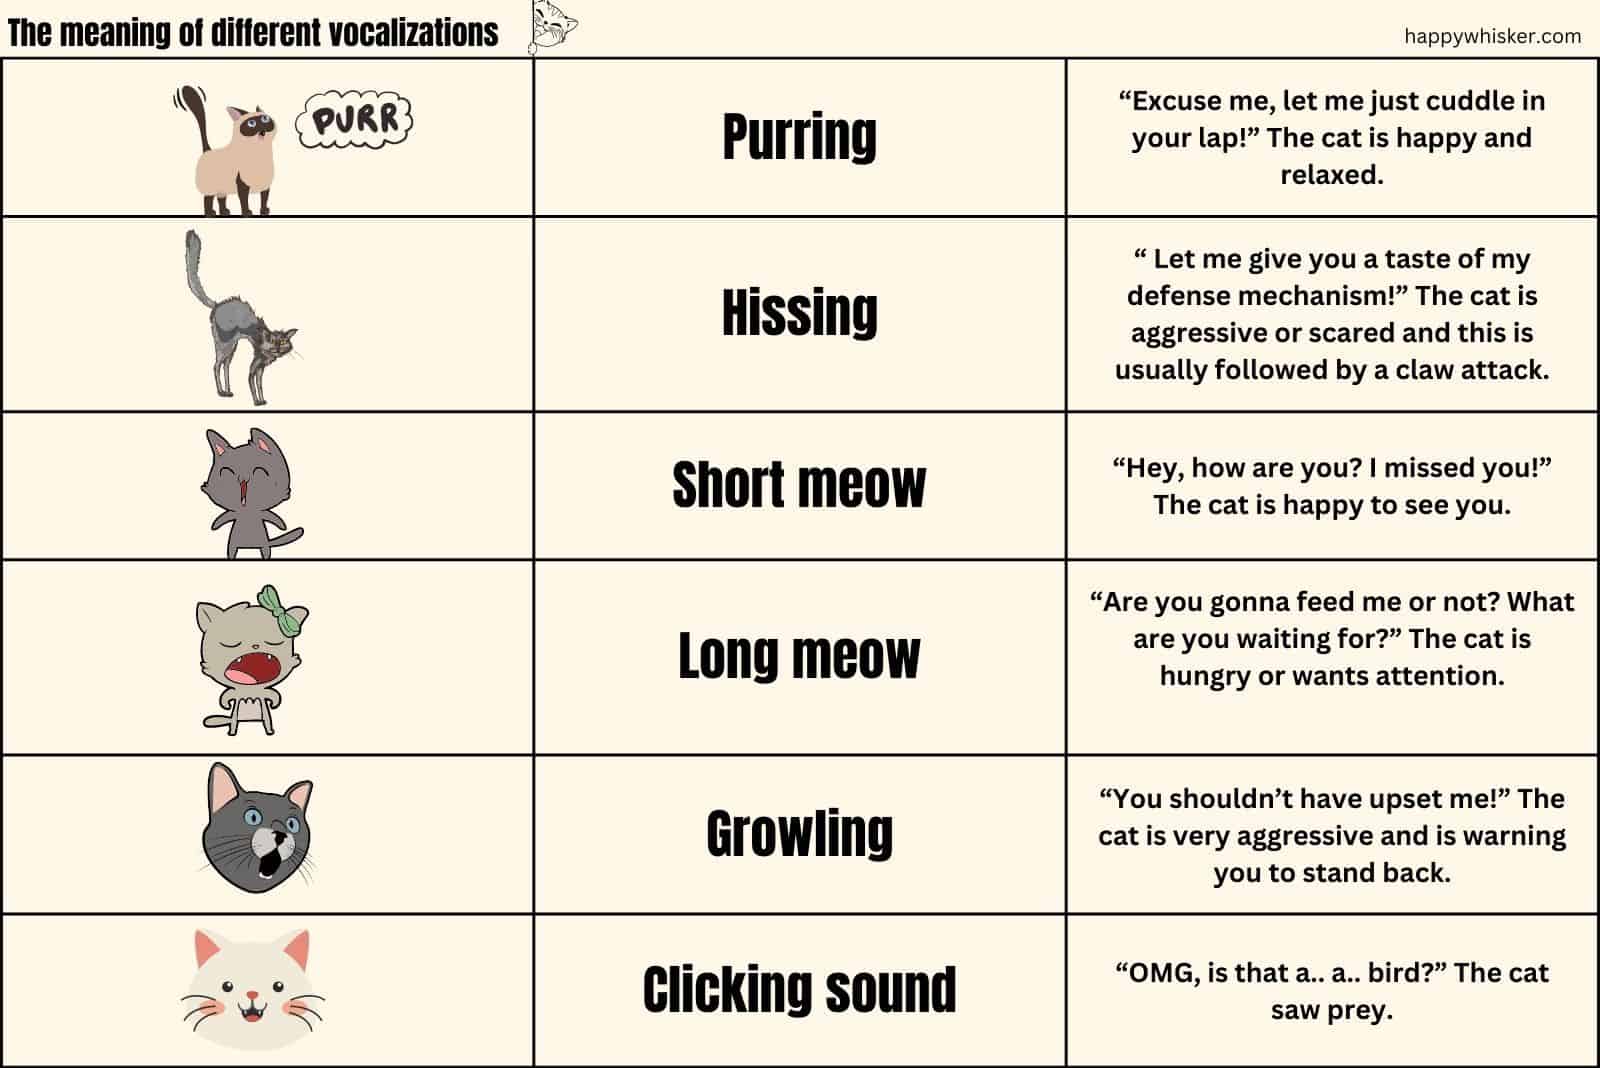 The meaning of cat’s vocalization